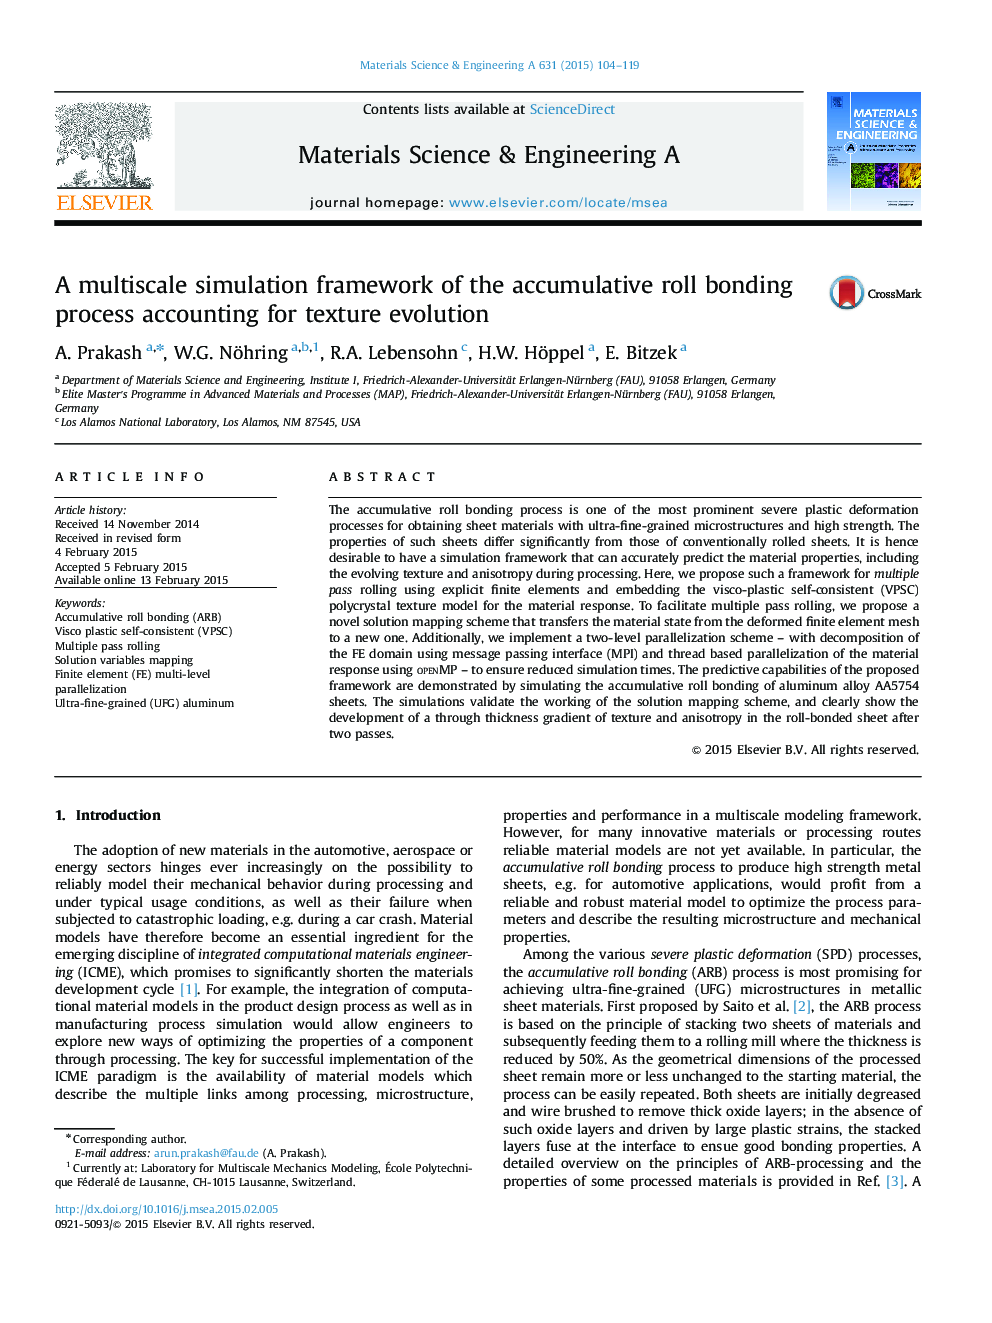 A multiscale simulation framework of the accumulative roll bonding process accounting for texture evolution